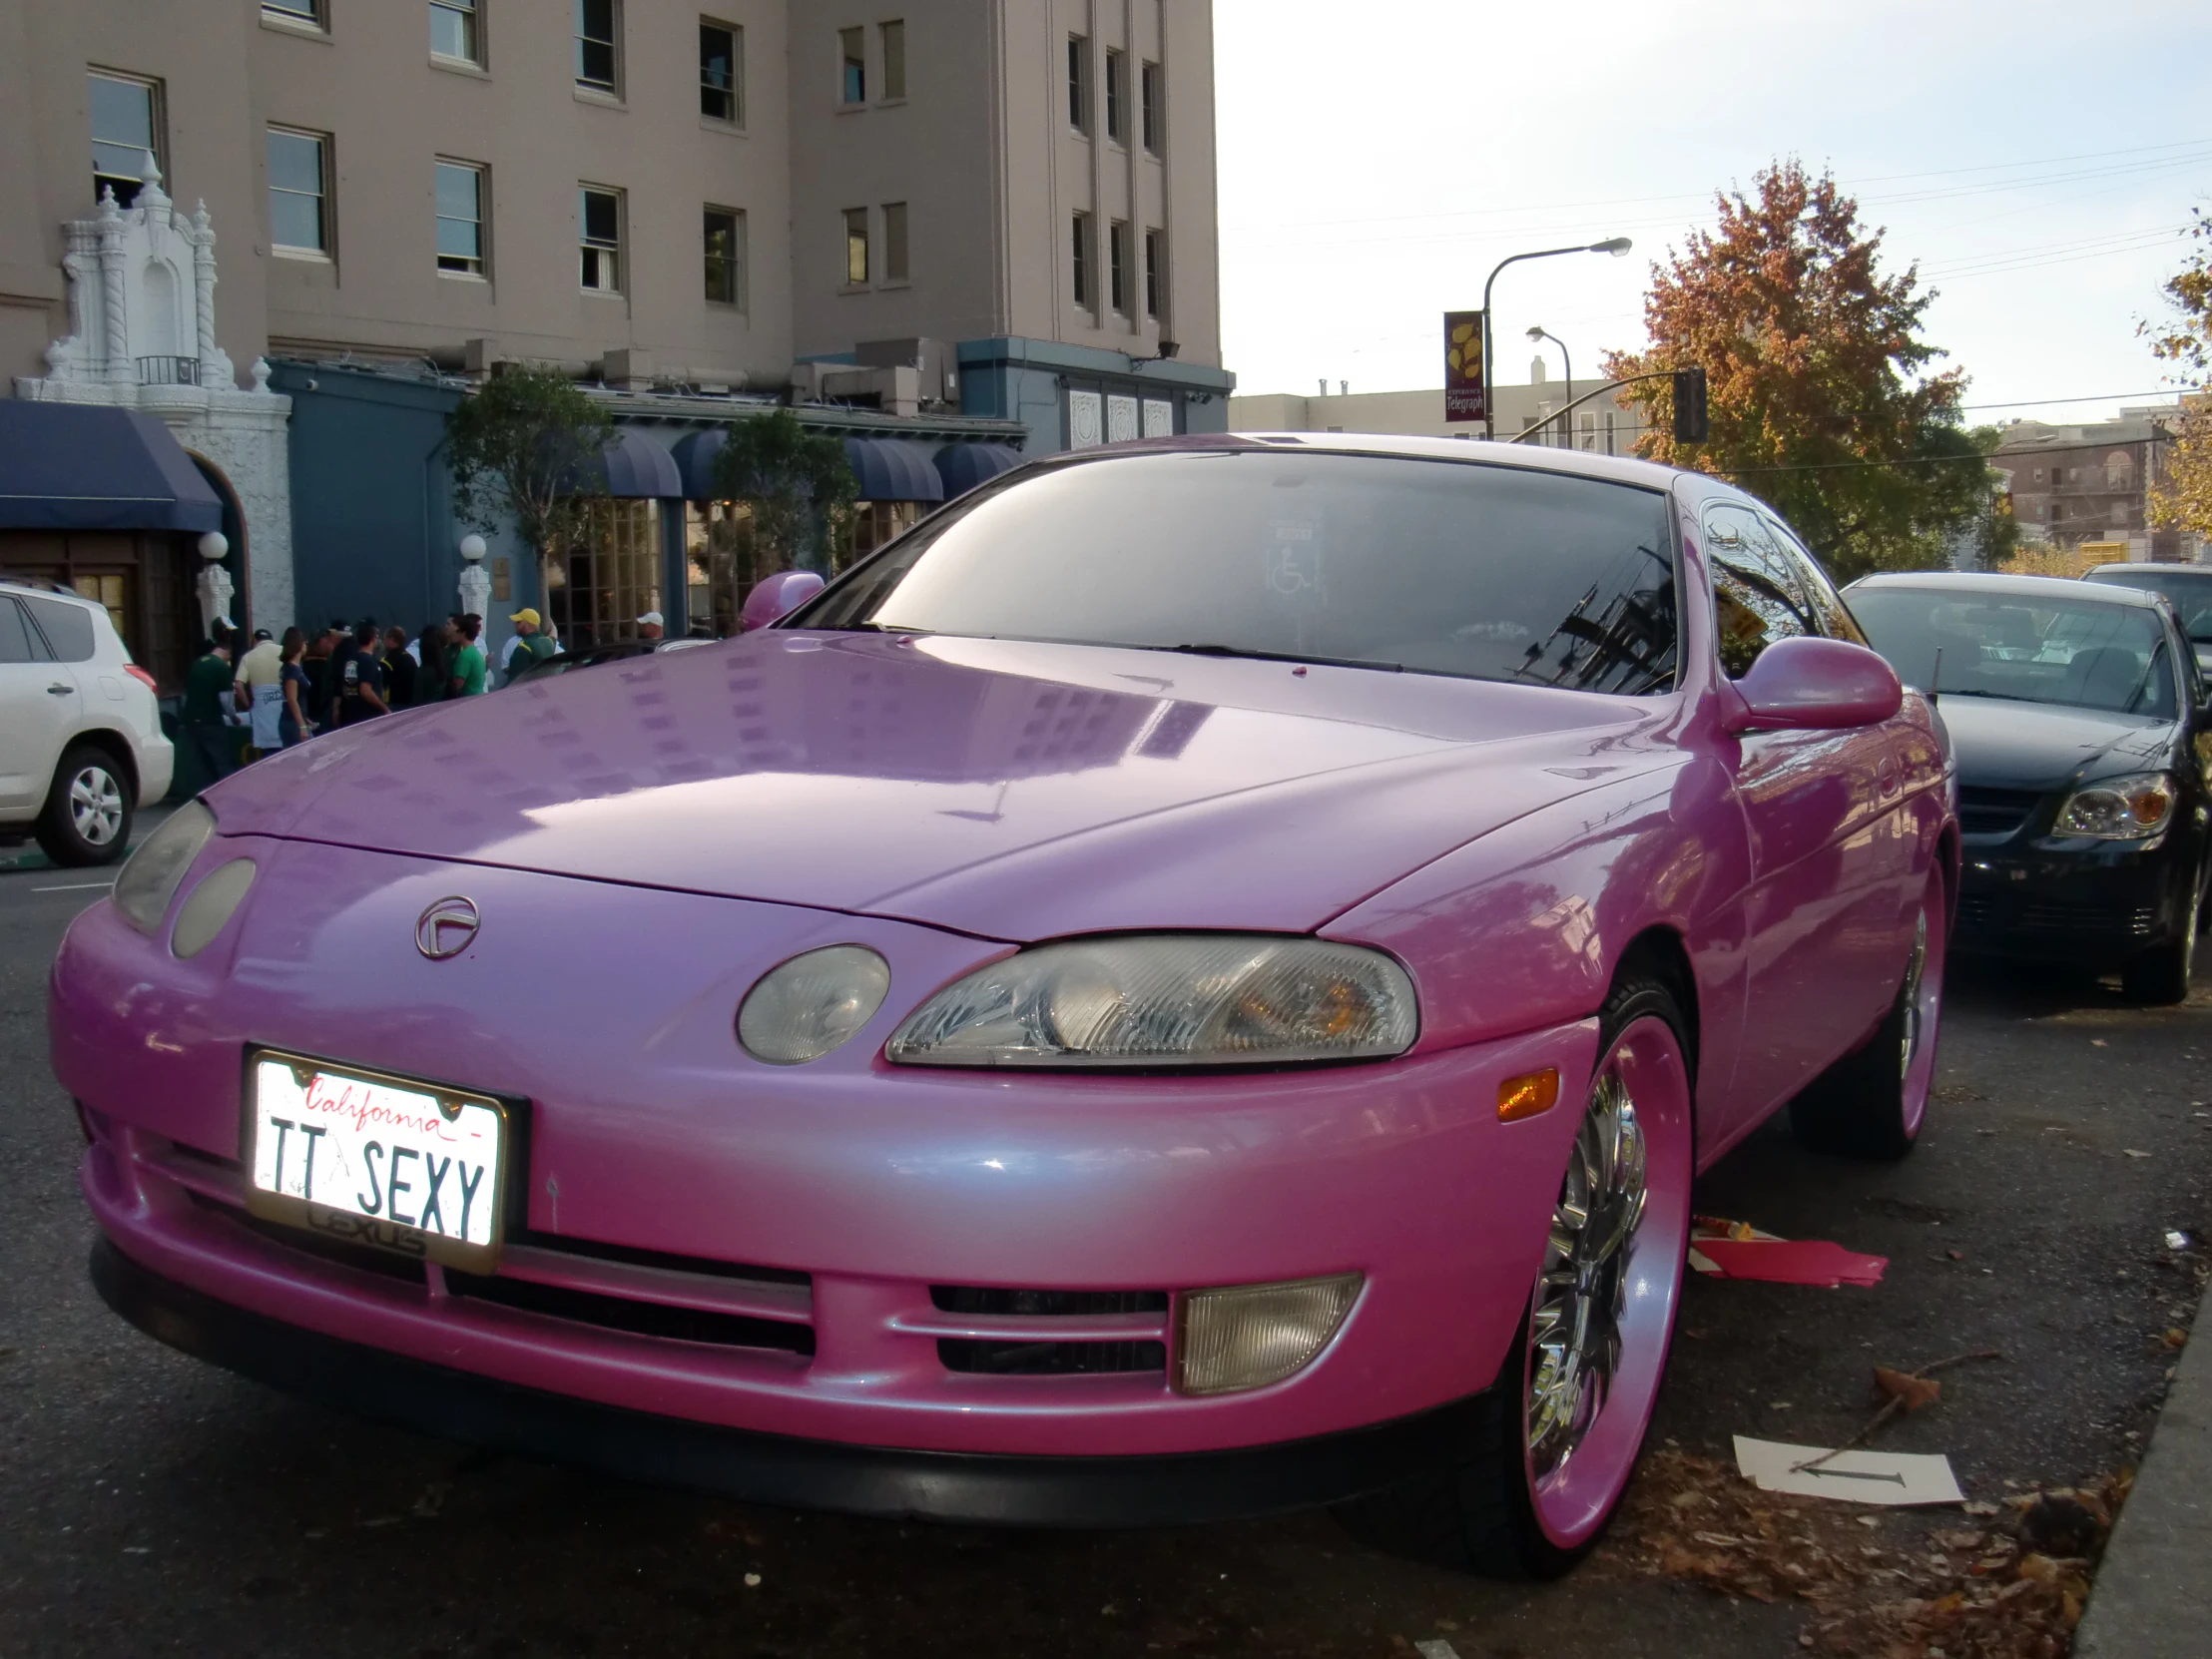 a pink car is parked by itself on the street